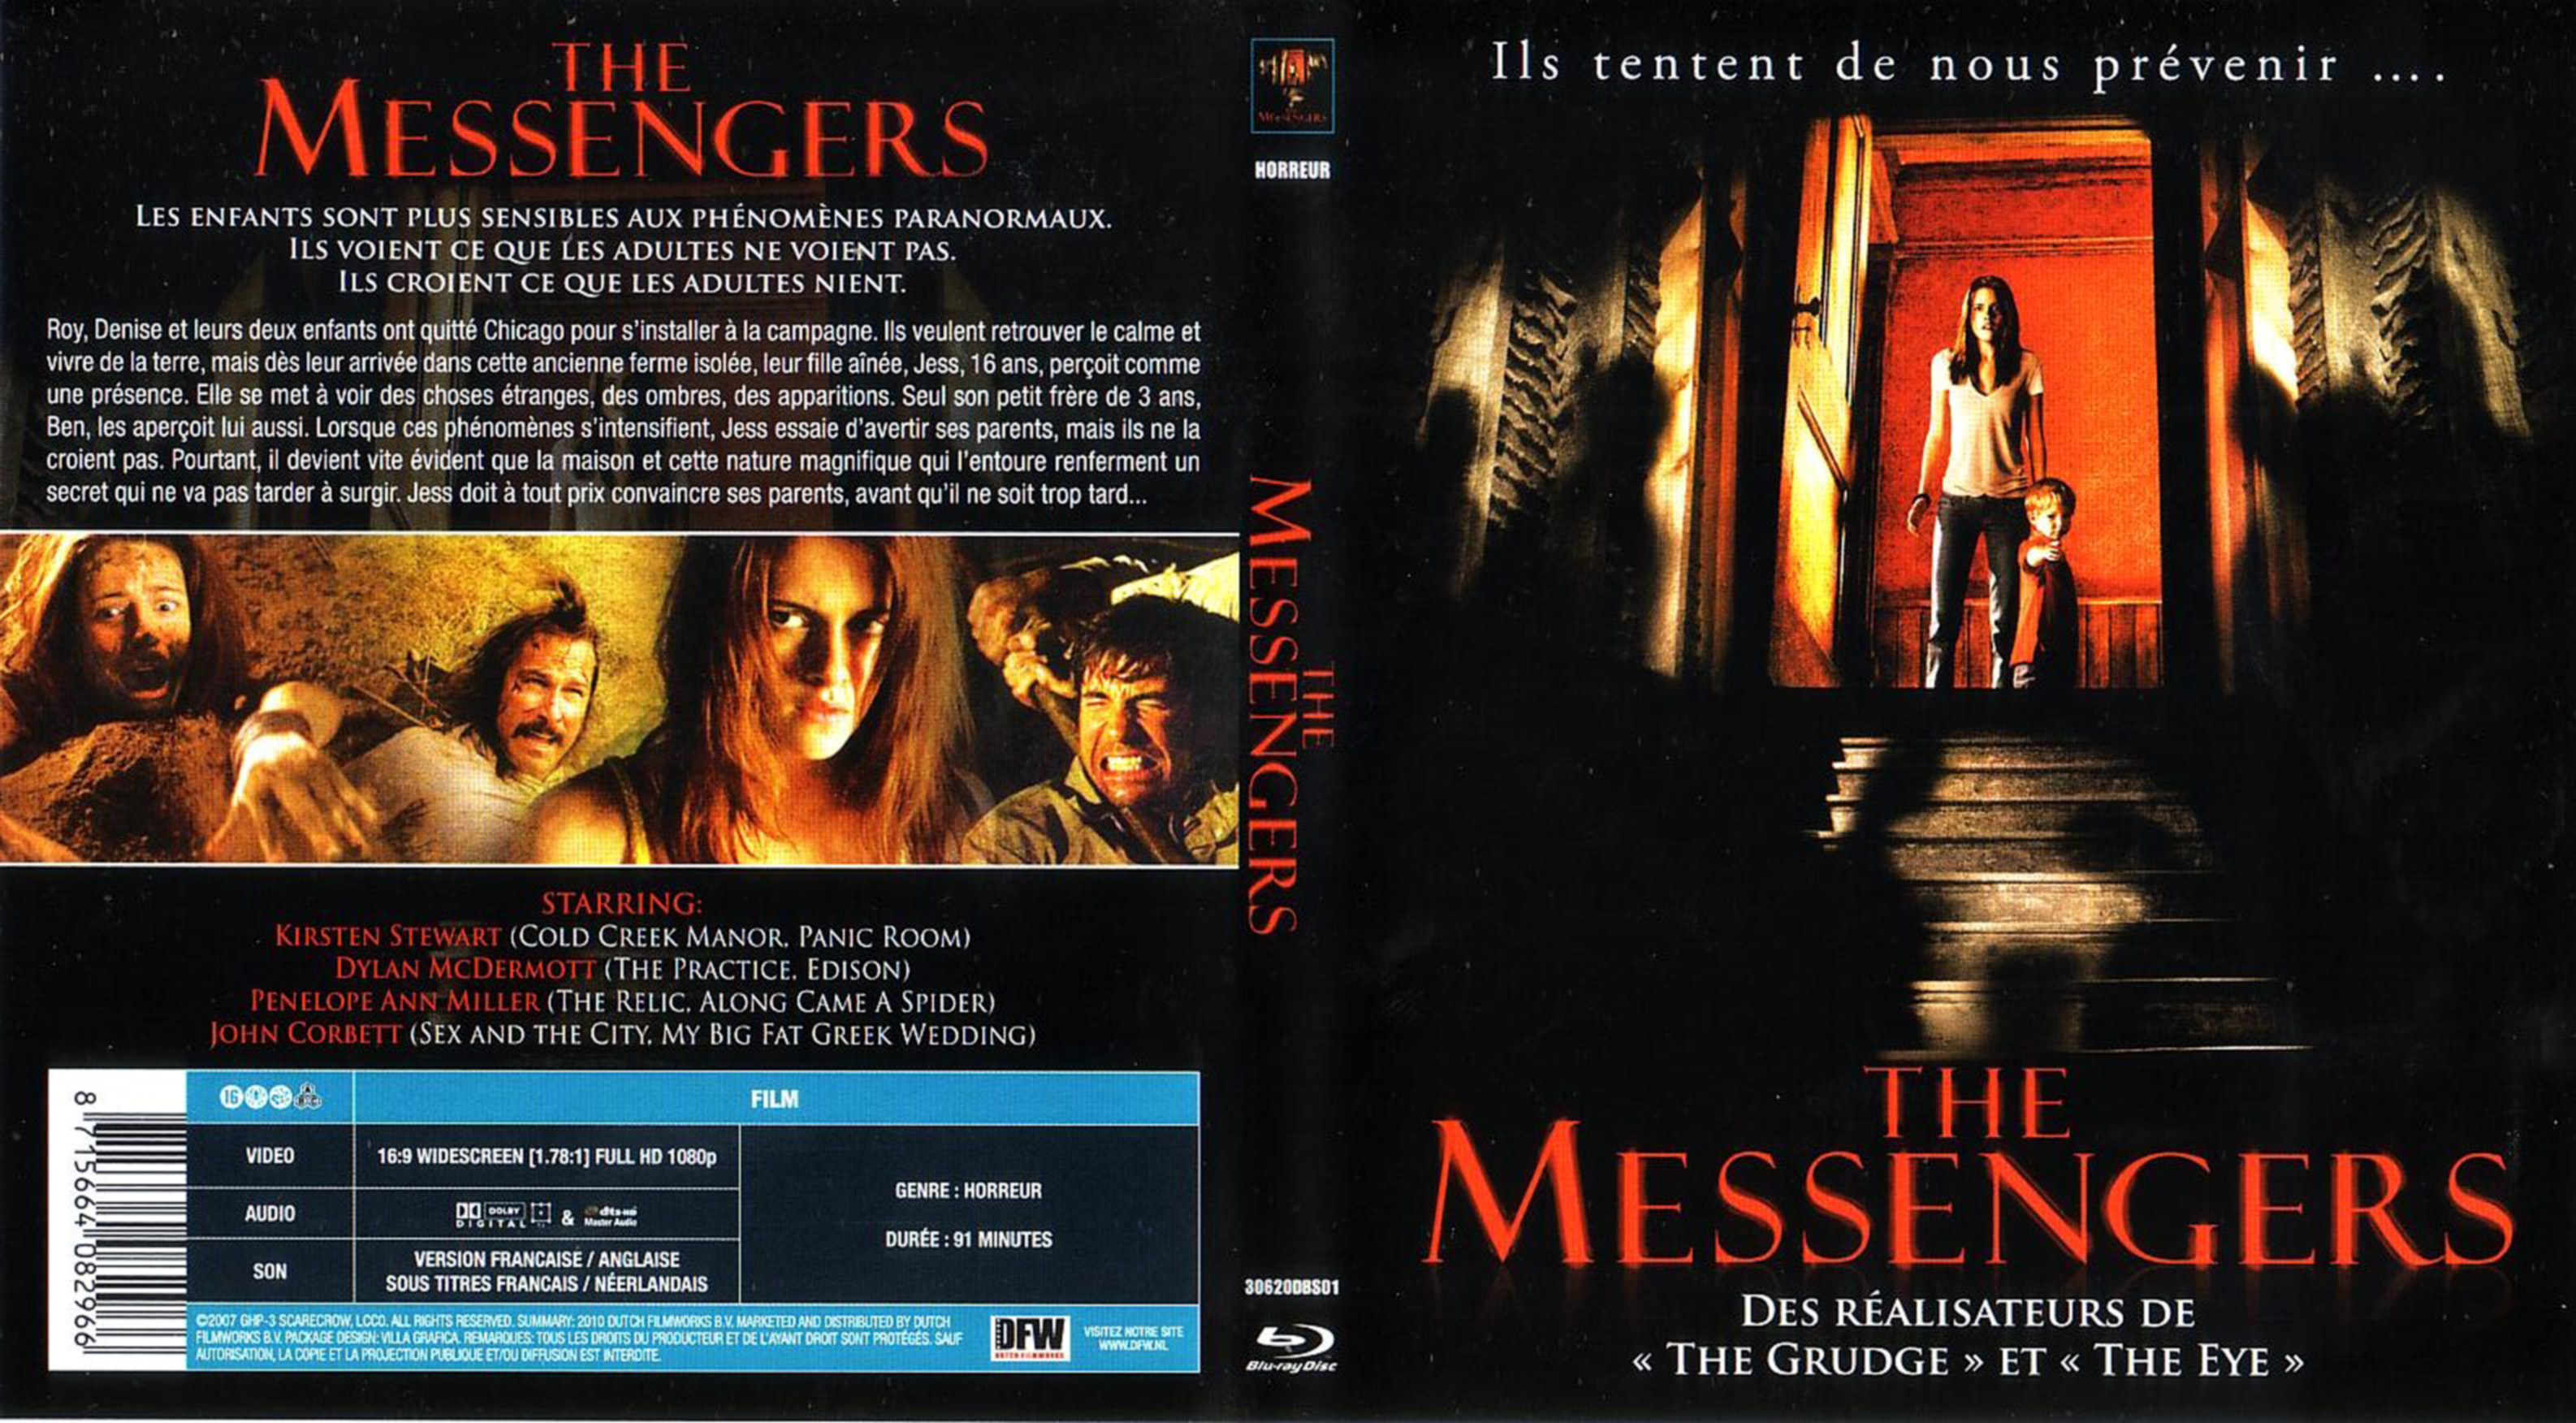 Jaquette DVD The messengers (BLU-RAY)